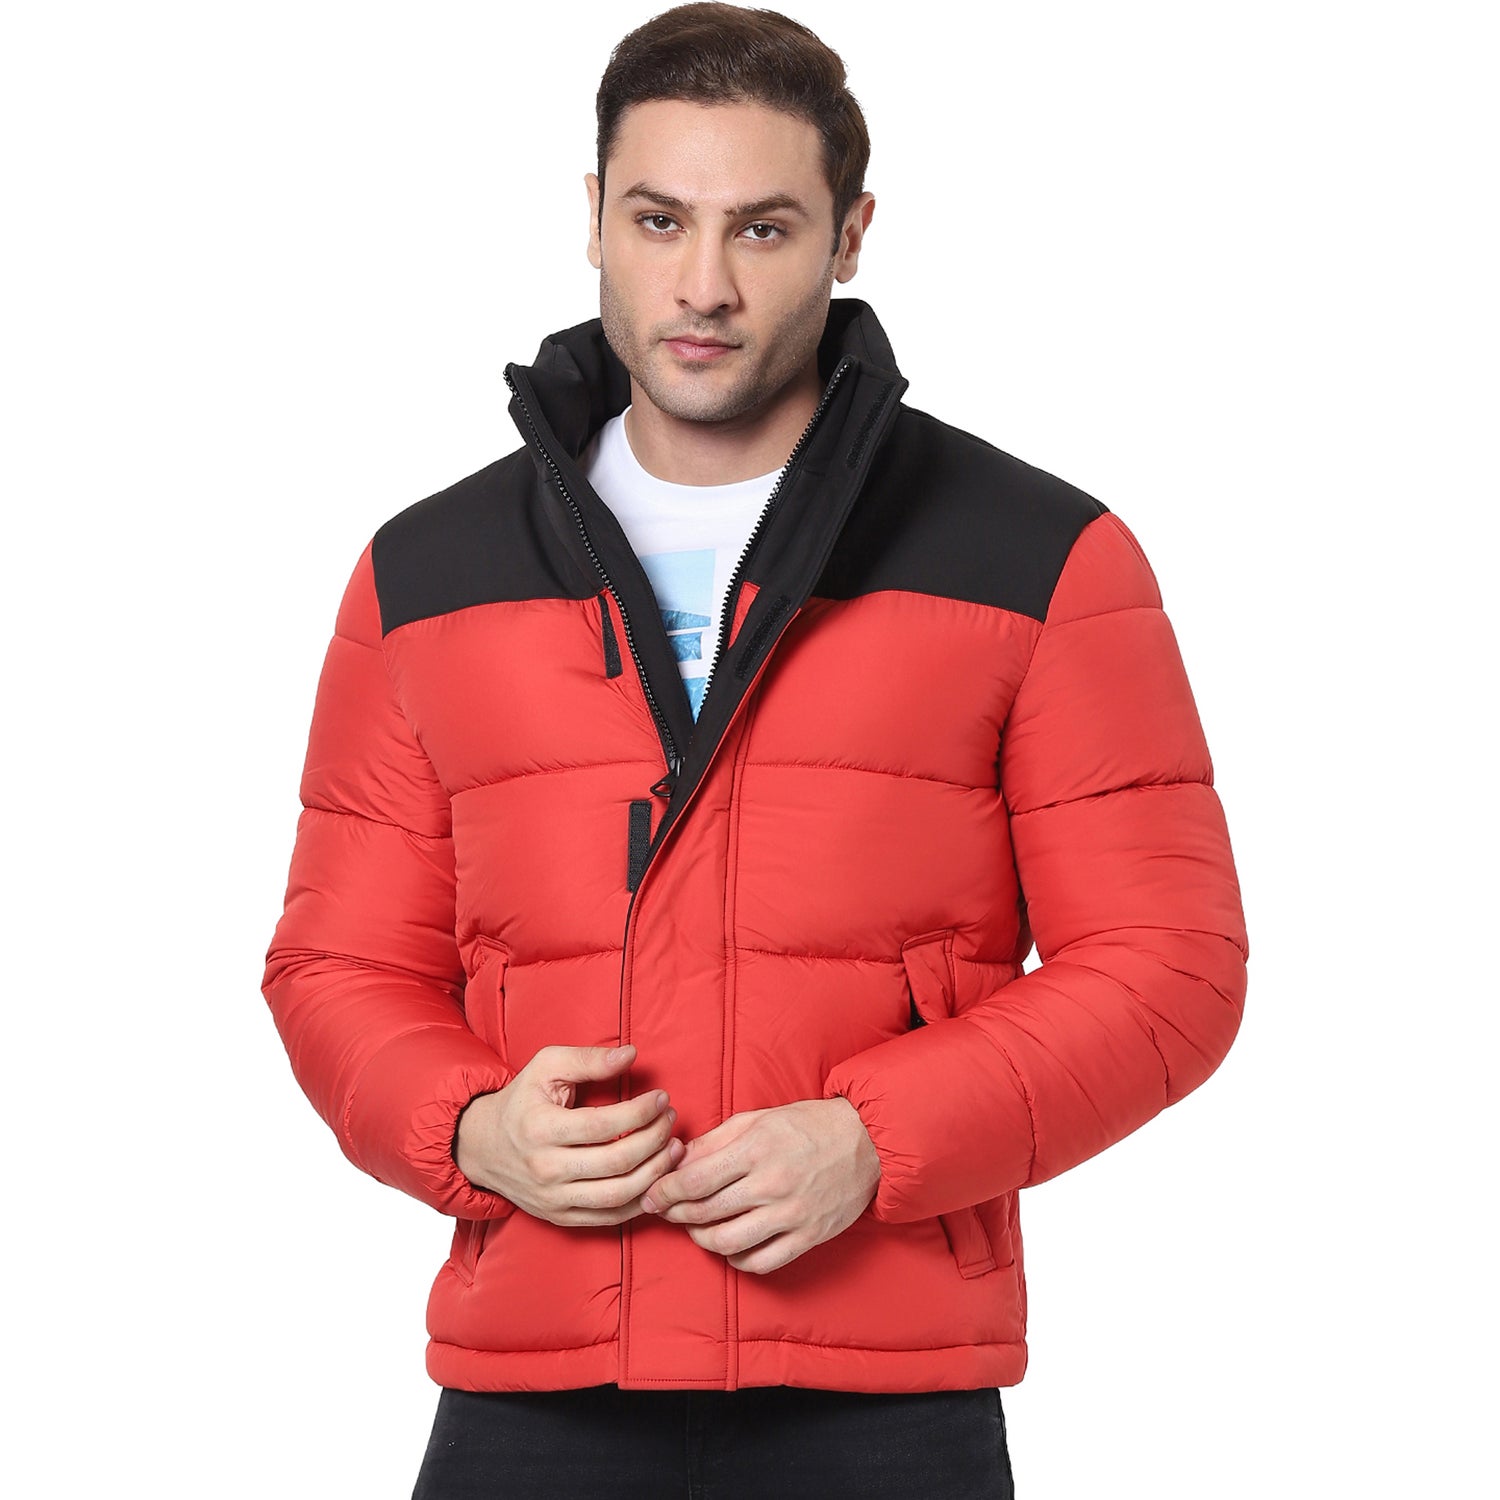 Red and Black Colourblocked Puffer Jacket (VUELECTRA)